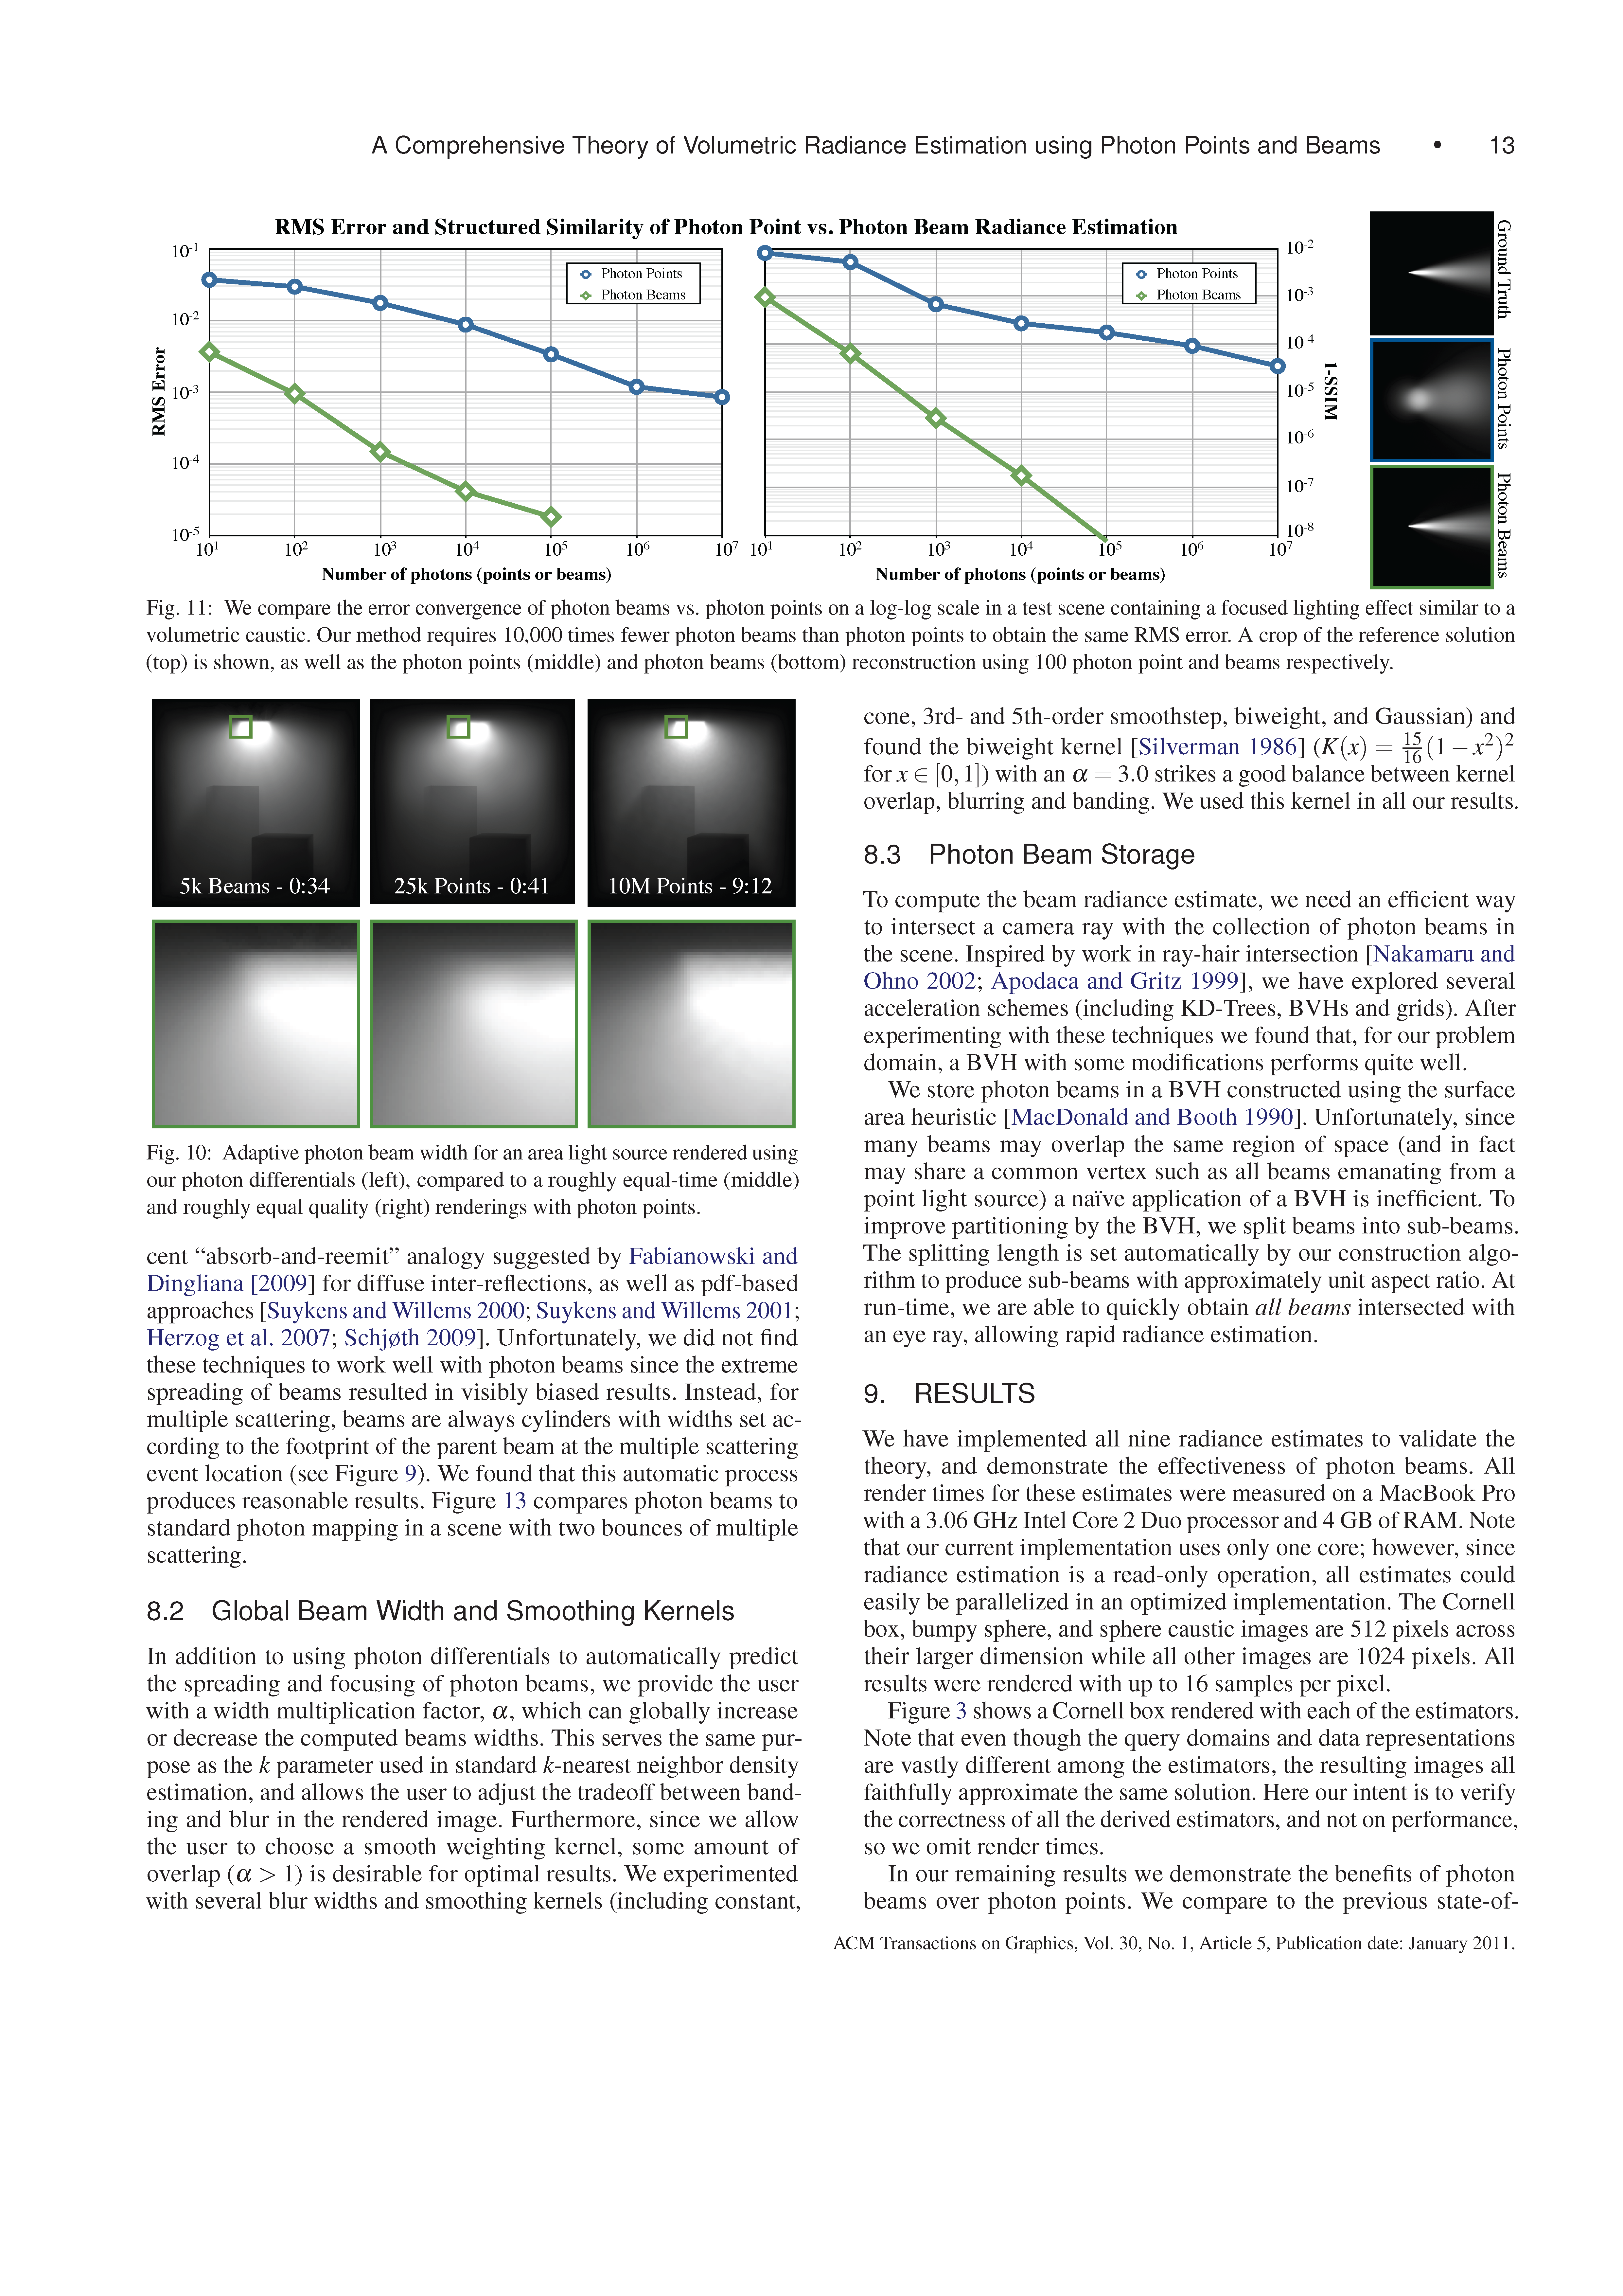 A Comprehensive Theory of Volumetric Radiance Estimation Using Photon Points and Beams Page 13